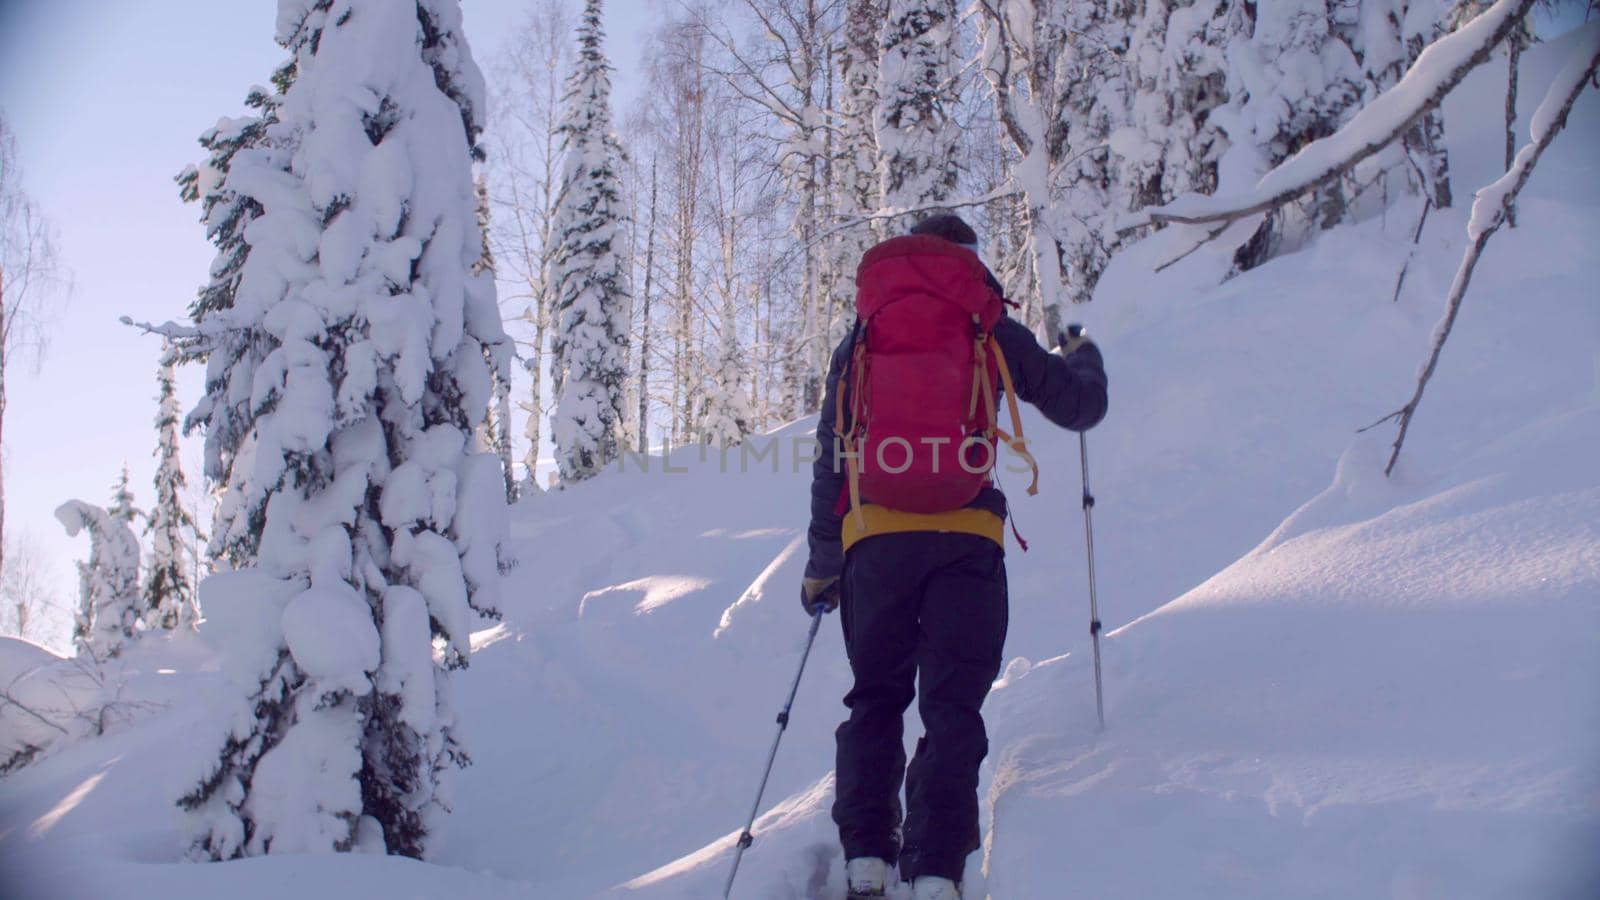 Skitour in Siberia. A man skiing in a snowy forest, rear view.